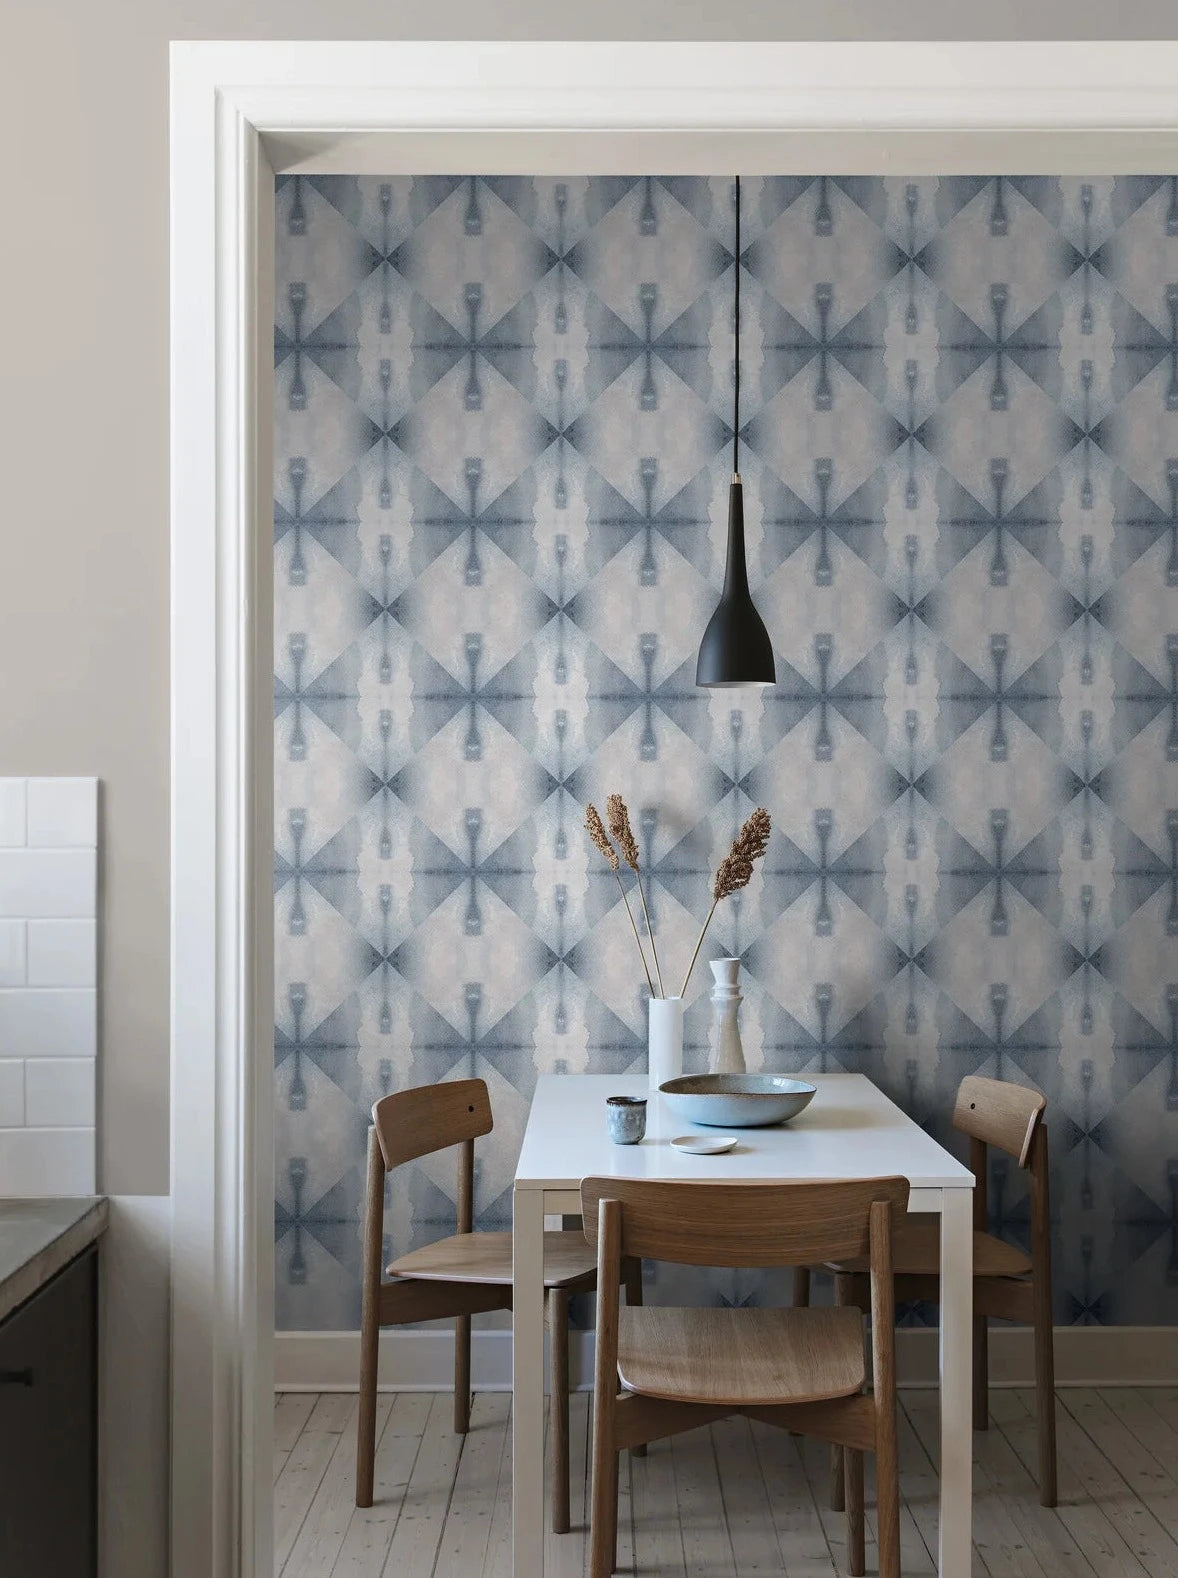 Wallpaper Shibori has a geometric pattern based on folded paper that is then softly colored – in this case in Indigo Blue.